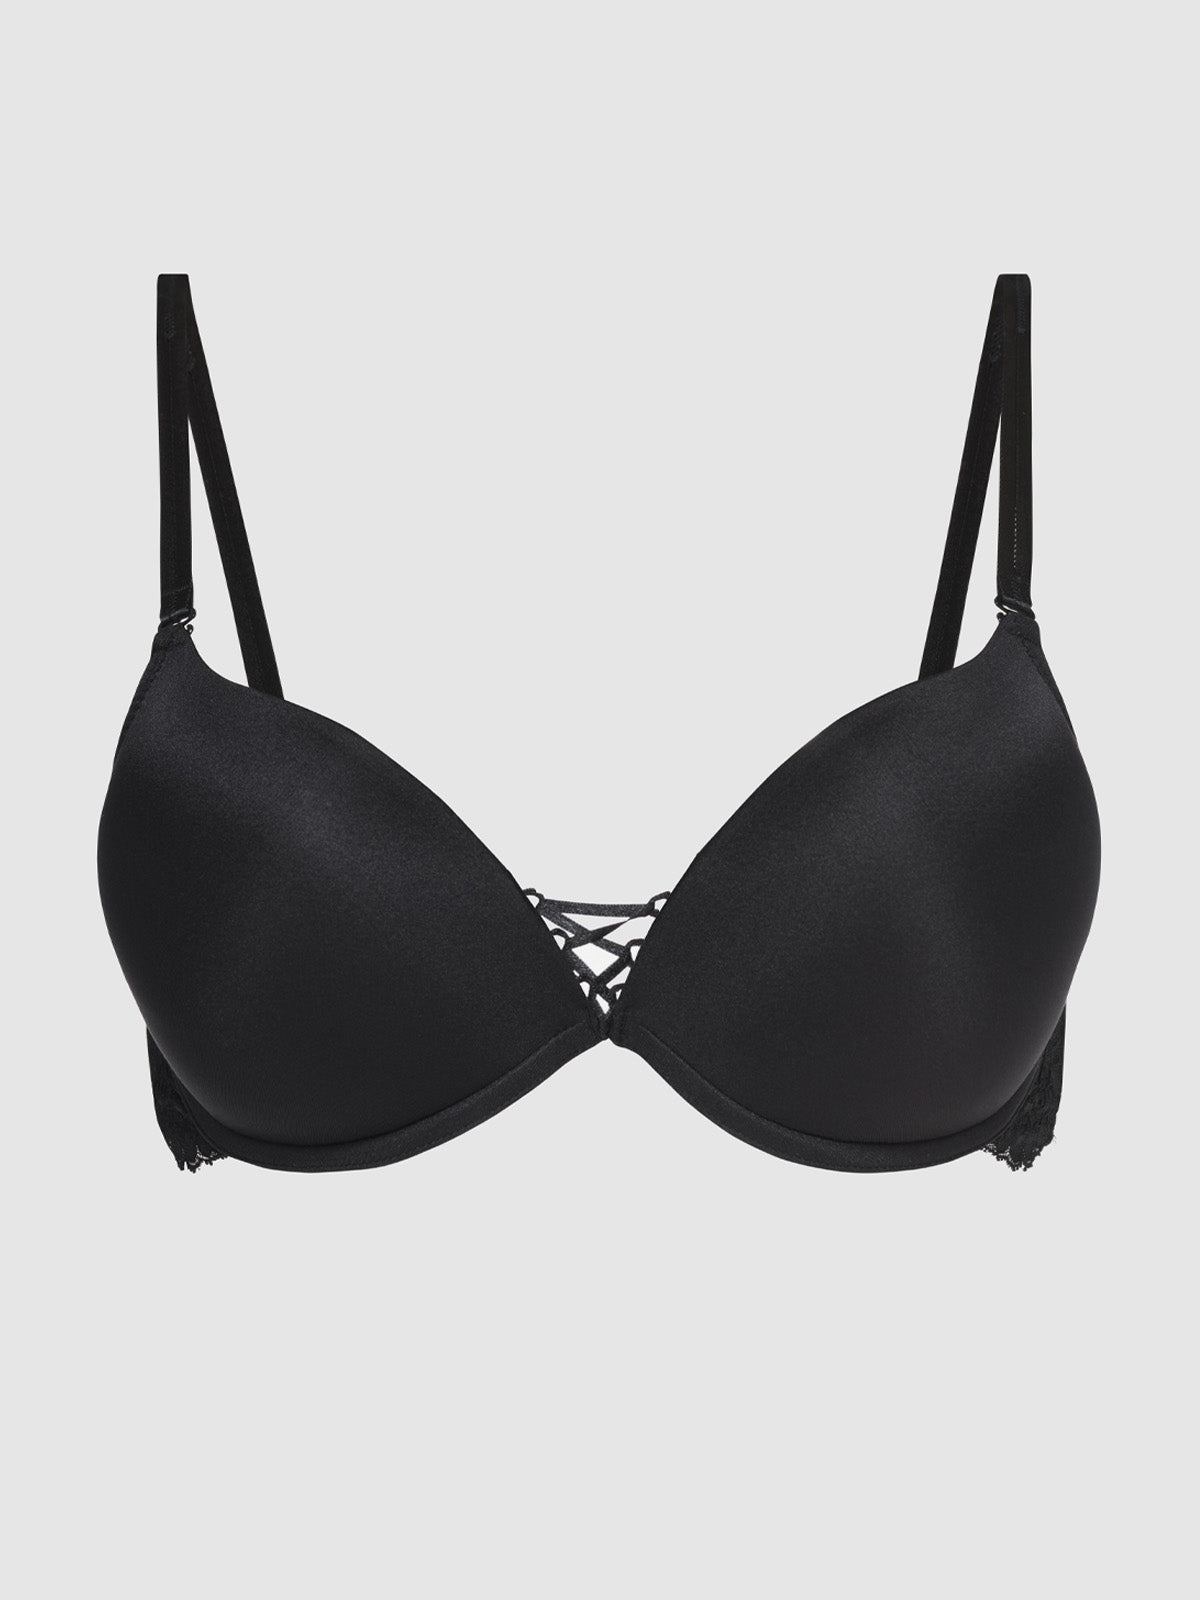 Stunning Gel Push-up Bra by Frederick's of Hollywood